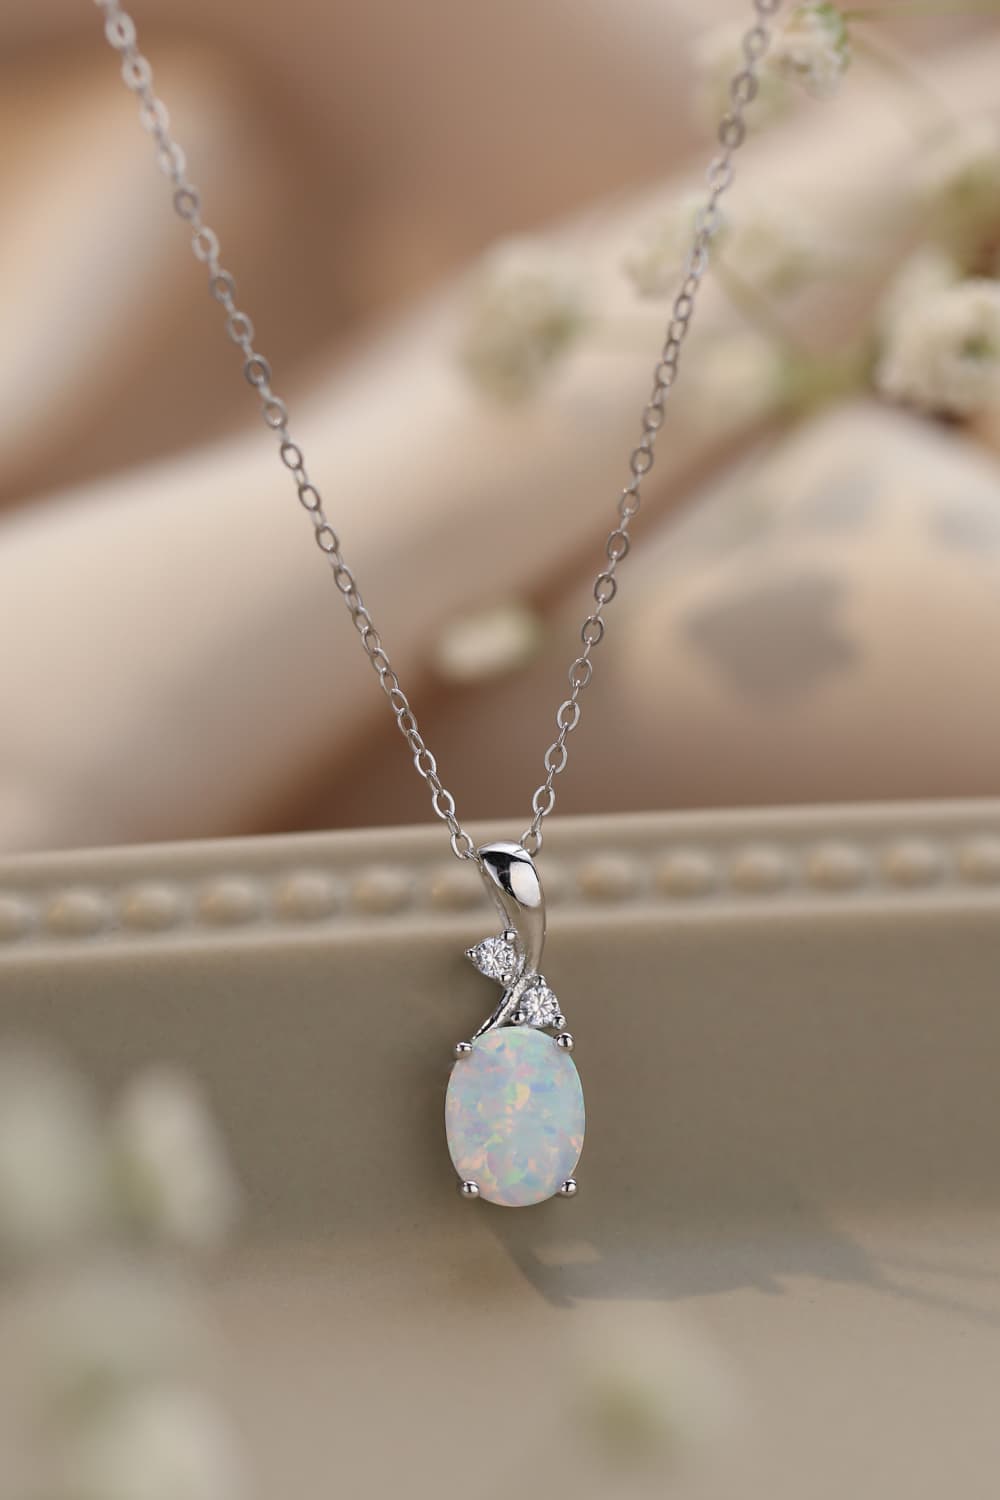 Opal Oval Pendant Chain Necklace - Tophatter Deals